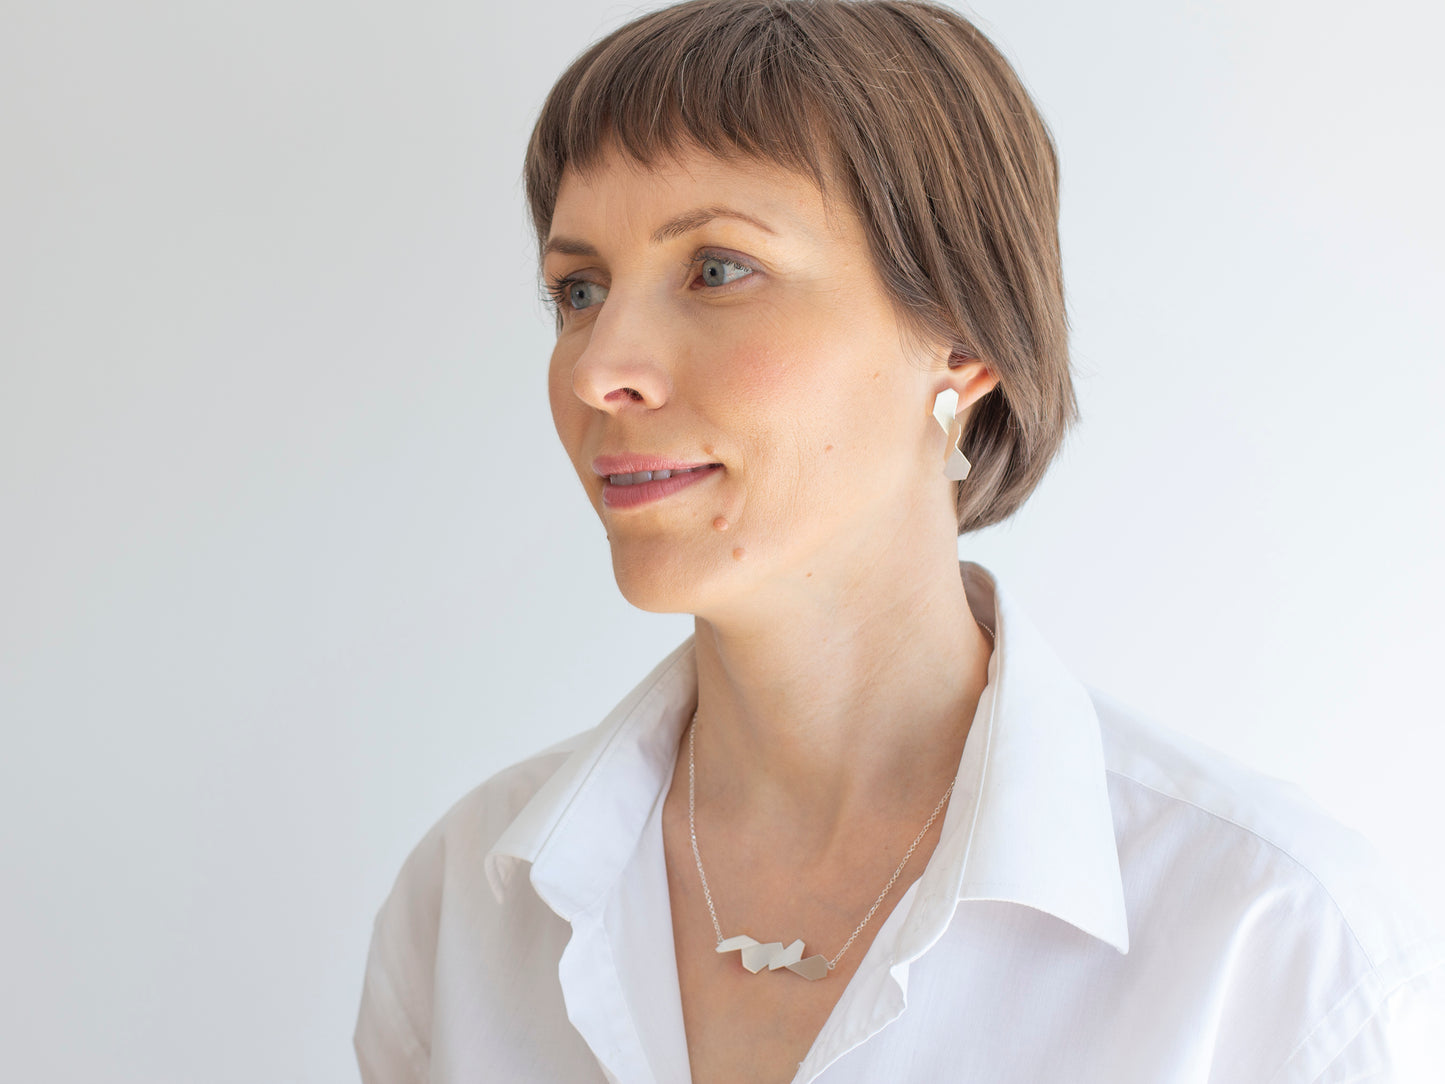 A woman wearing white shirt and sterling silver geometric jewelry